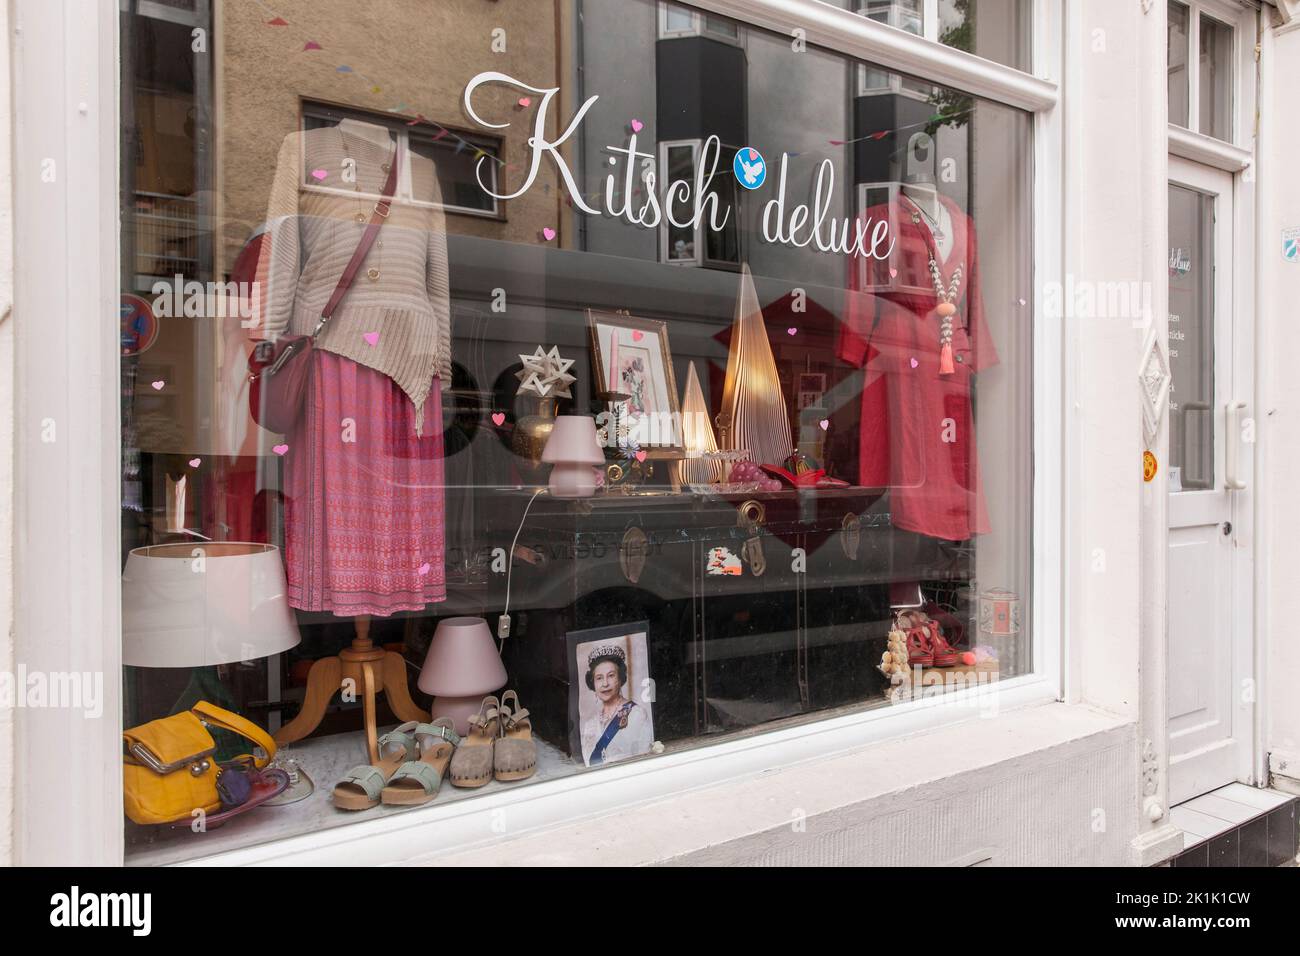 the fashion boutique Kitsch deluxe in Koerner street in Ehrenfeld district, Cologne, Germany. die Modeboutique Kitsch deluxe in der Koernerstrasse im Stock Photo